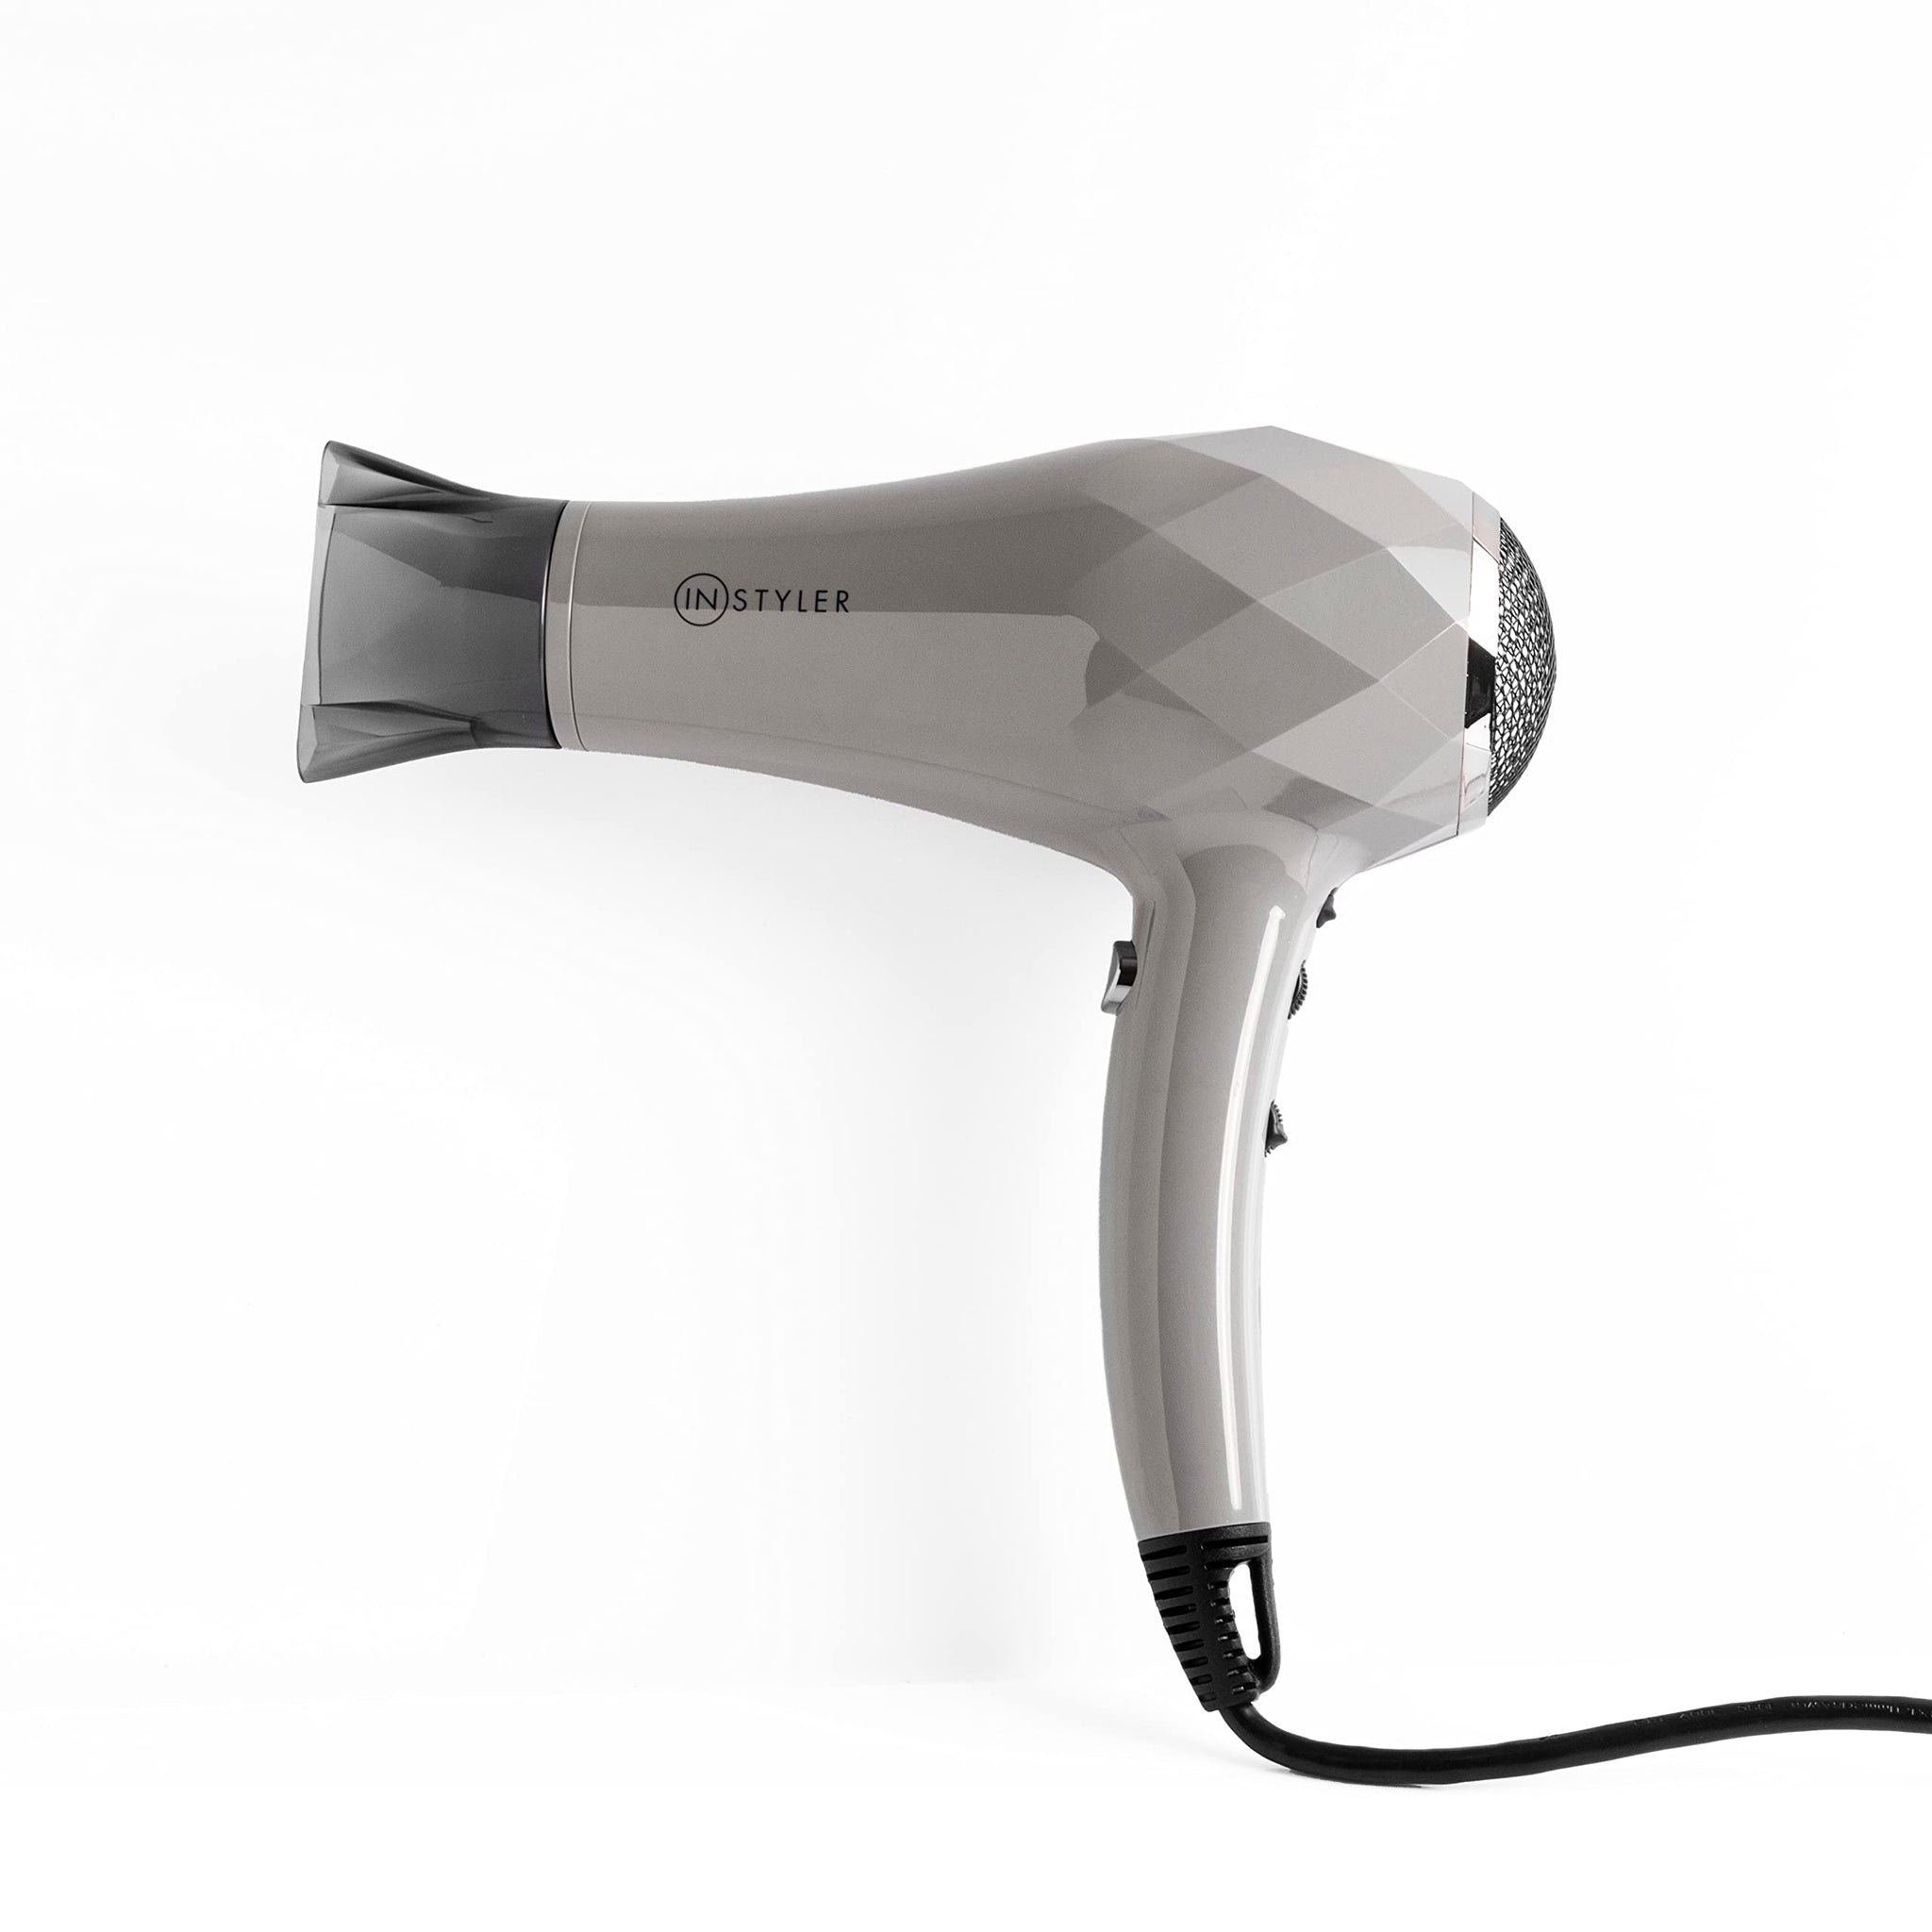 Turbo Ionic Dryer by InStyler